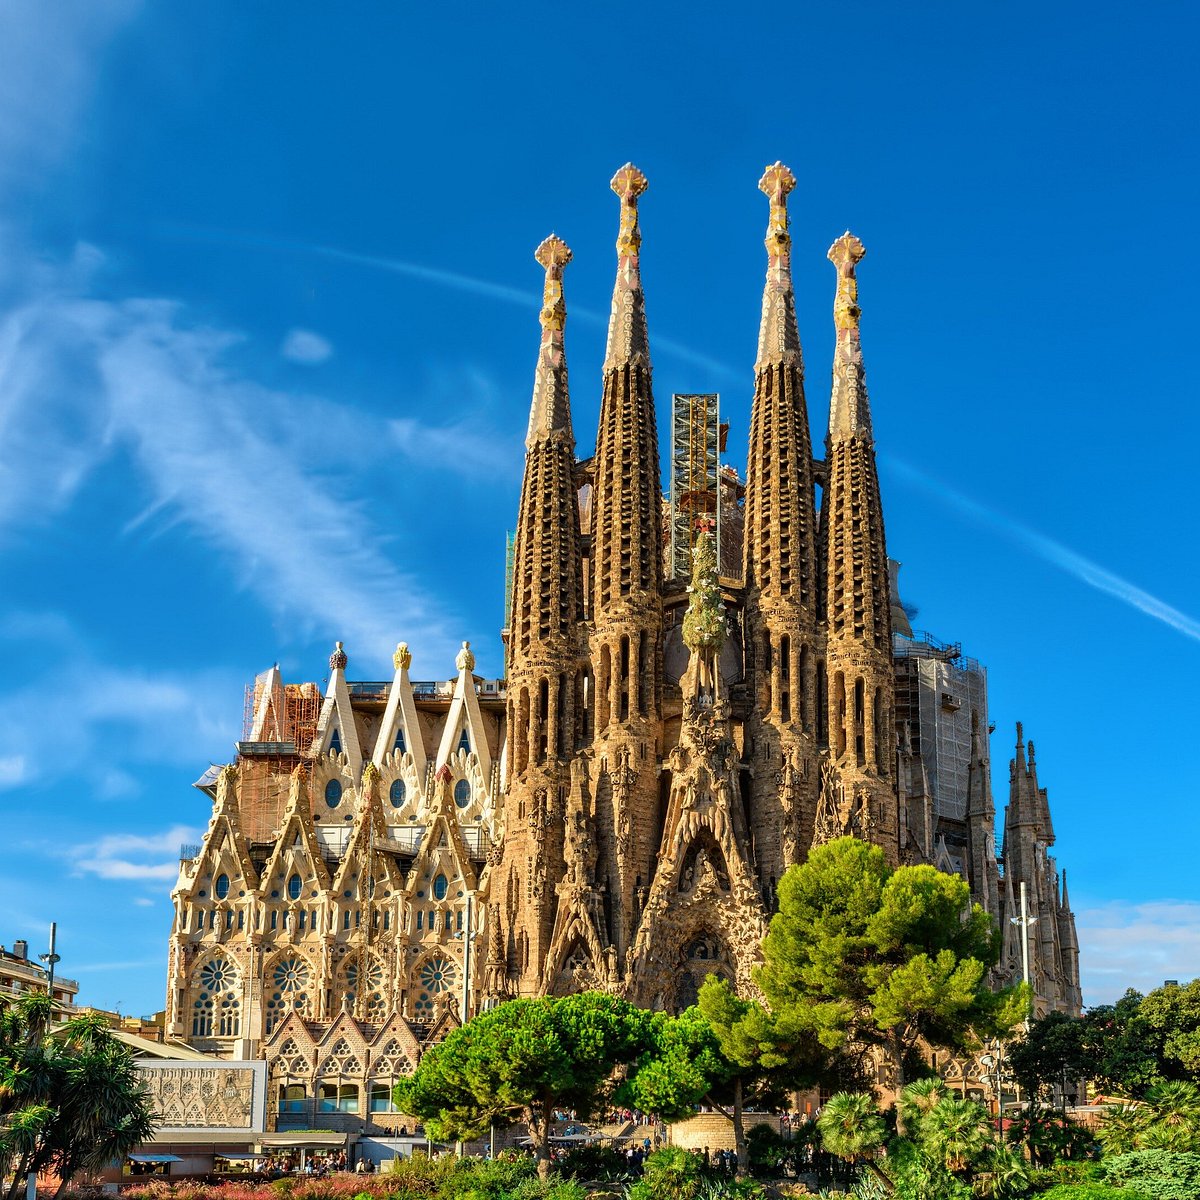 BarcelonaTravel - All You Need to Know BEFORE You Go (with Photos)